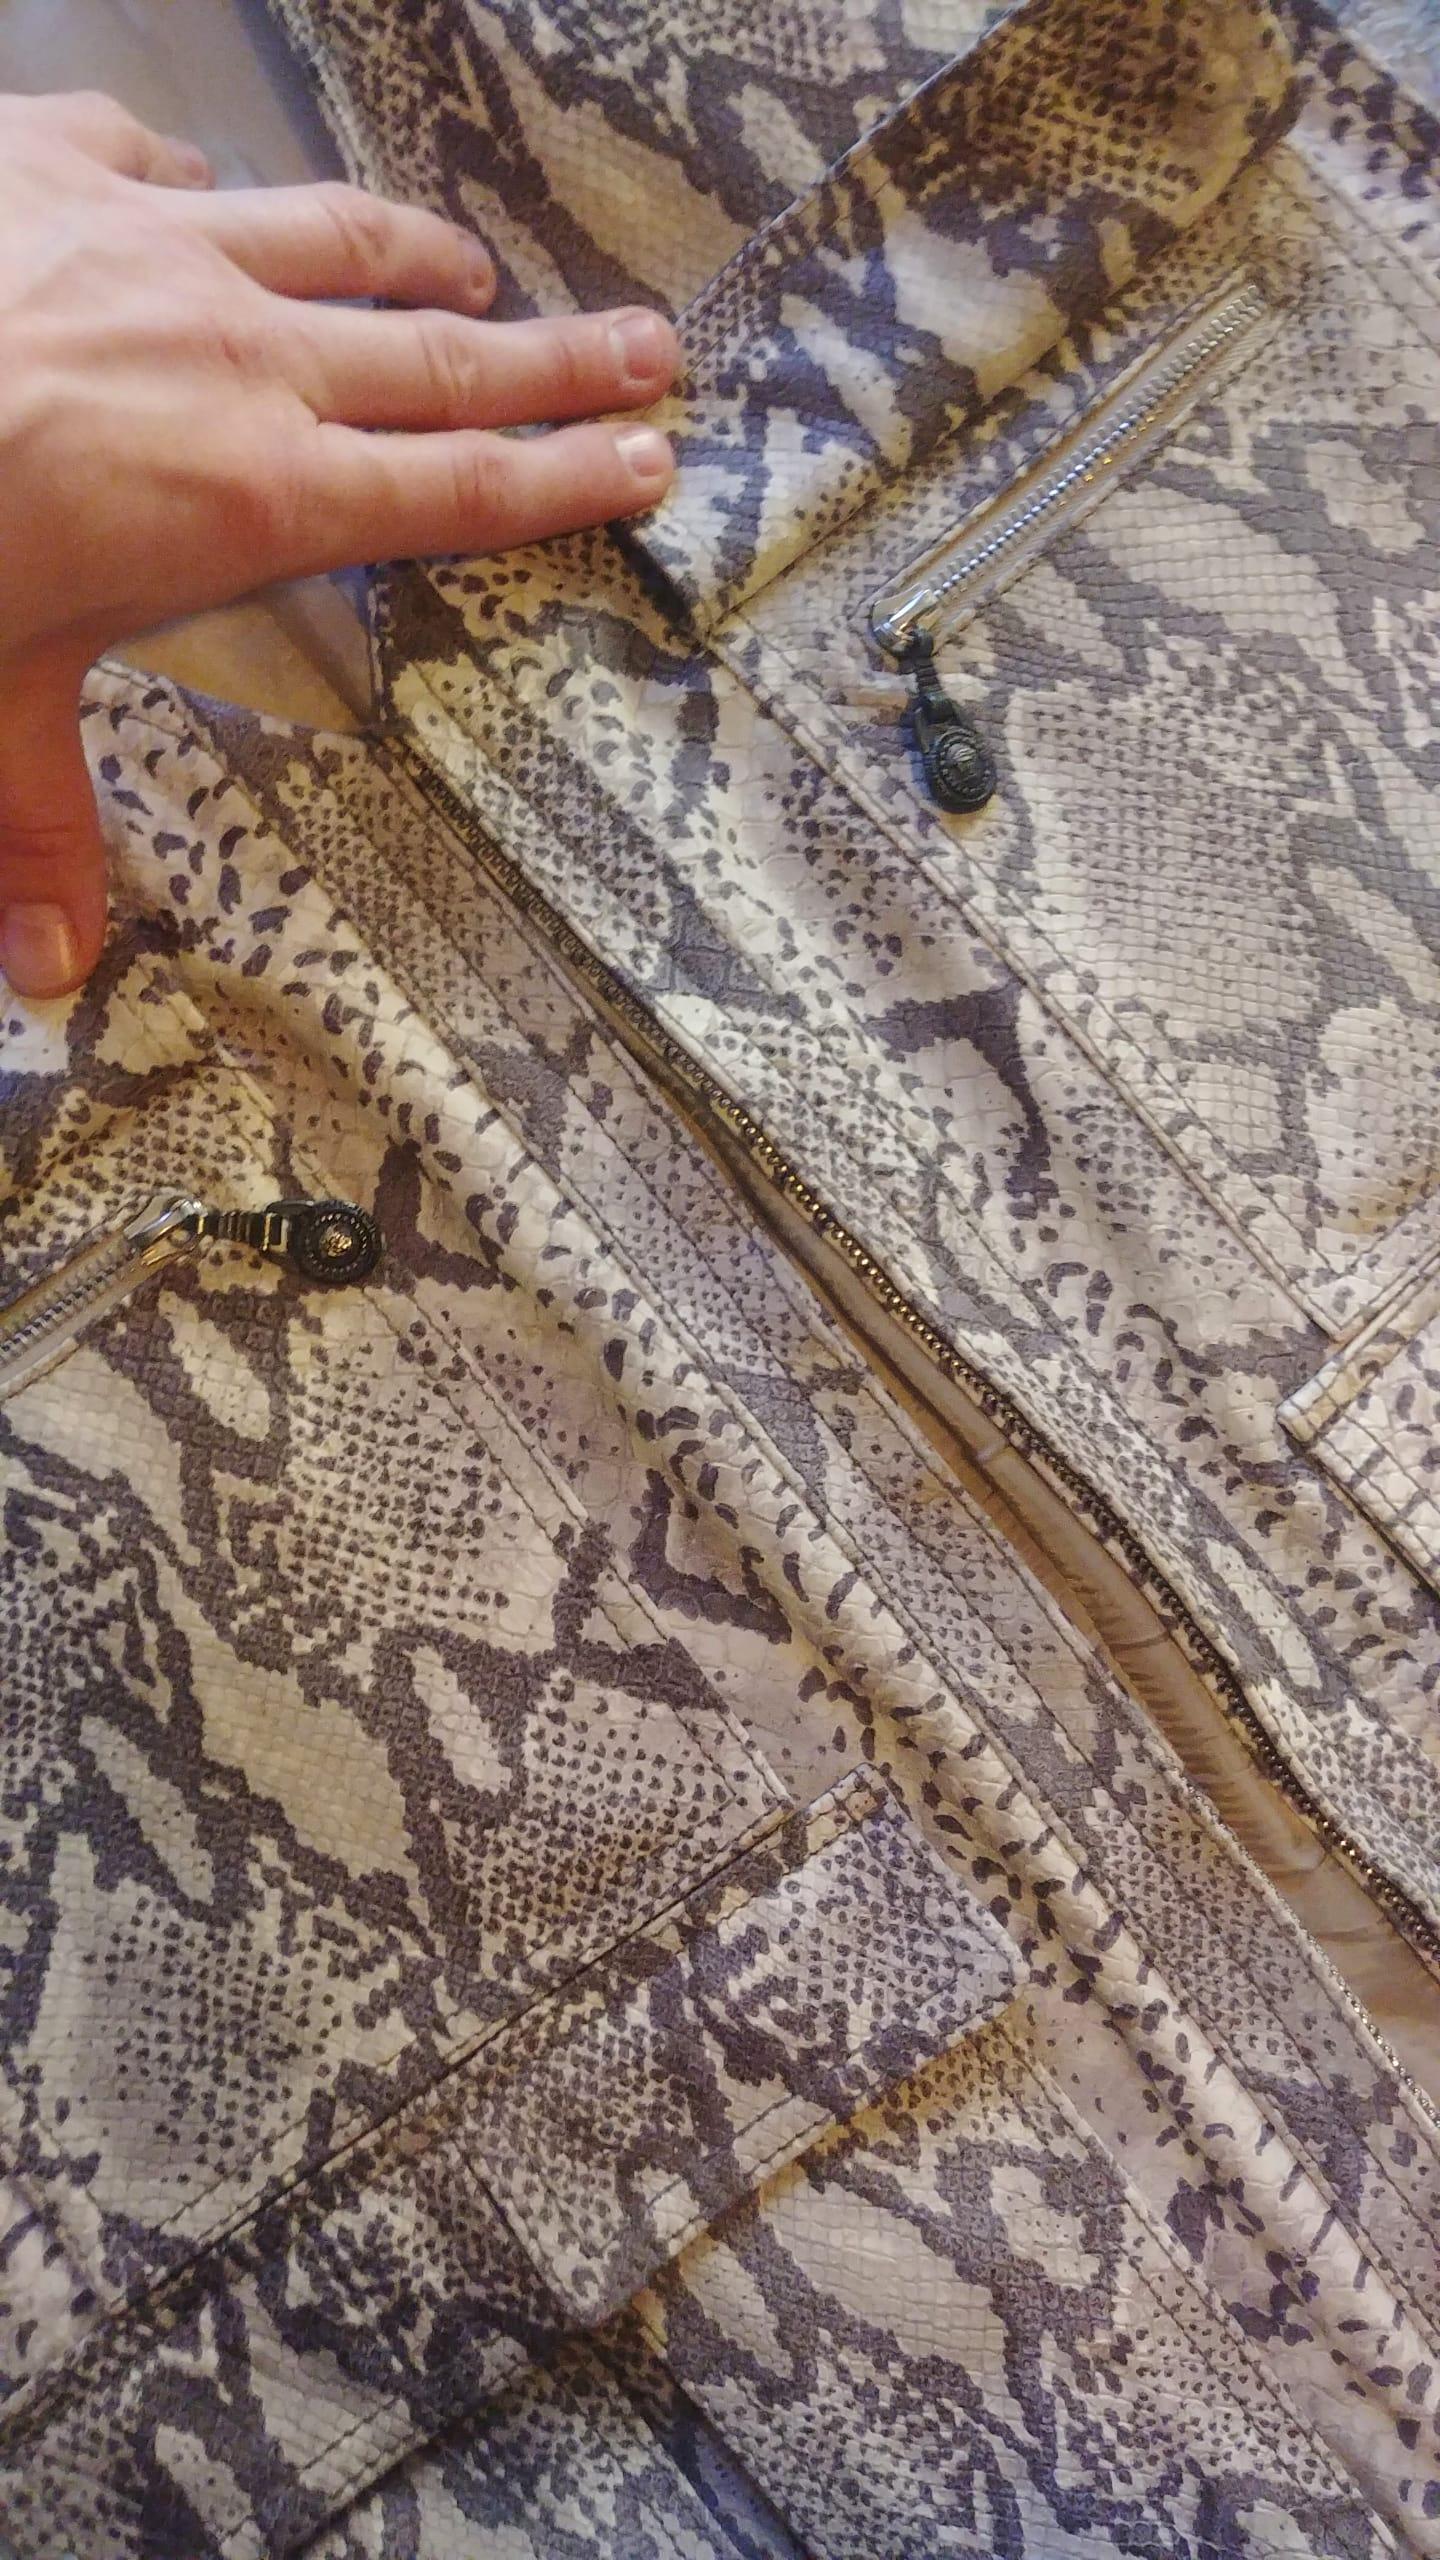 This a rare men's snake print leather Gianni Versace men's vest, which is in very good condition except for the Medusa head zip pull which has detached. This should be easily fixable and has been taken into consideration when pricing the item. Zip